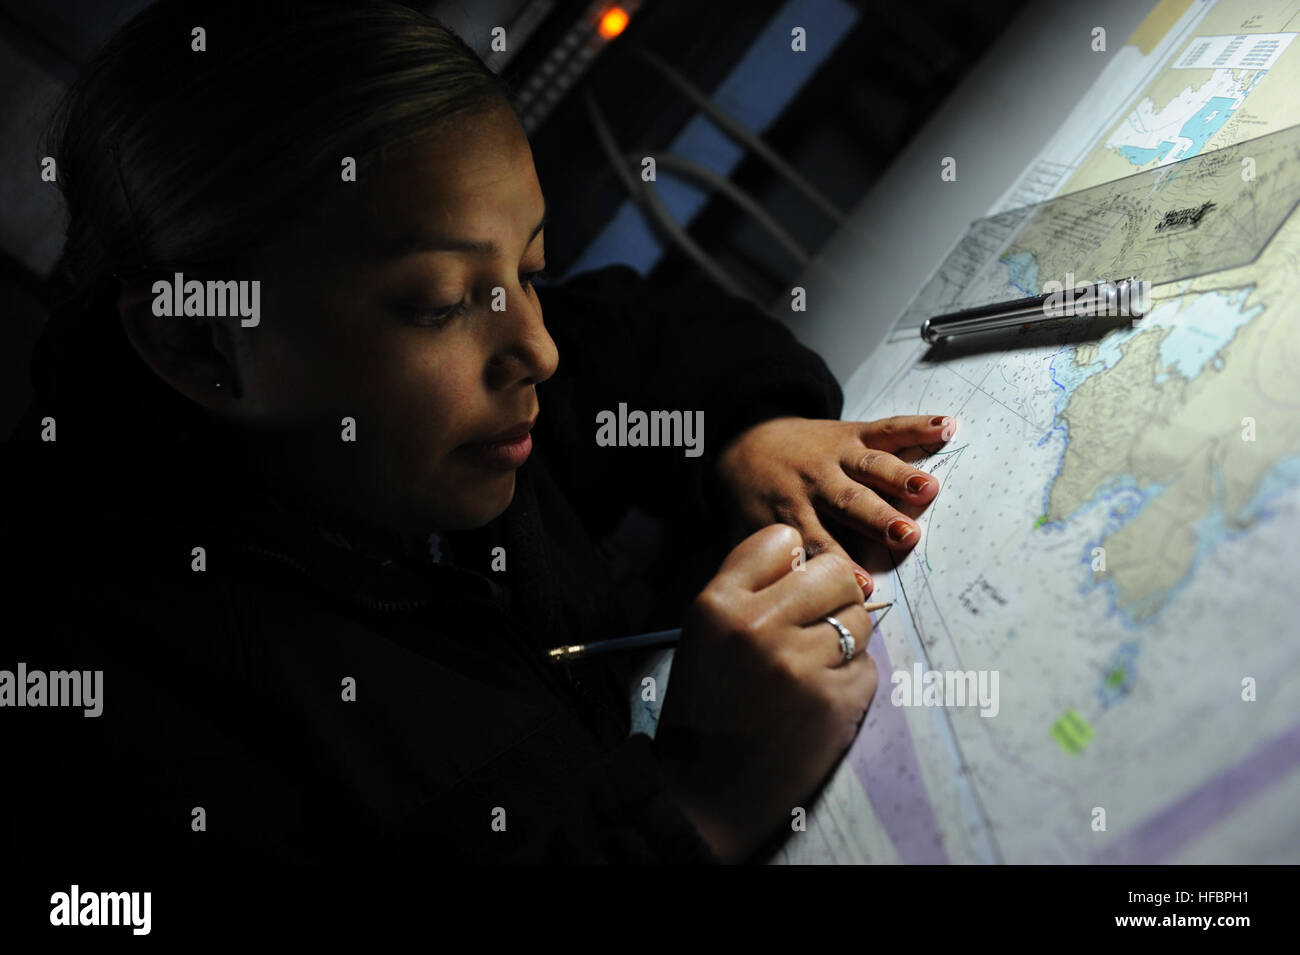 PACIFIC OCEAN (Sept. 29, 2012) Operations Specialist Seaman Jennifer Cloud, from Houston, Texas, plots points on a map in the commanding officerÕs tactical operation plot compartment aboard the aircraft carrier USS Nimitz (CVN 68). Nimitz is en route to San Diego to embark Carrier Air Wing 11 as it prepares for a composite training unit exercise. (U.S. Navy photo by Mass Communication Specialist Seaman Jess Lewis/Released) 120929-N-RX668-040 Join the conversation www.facebook.com/USNavy www.twitter.com/USNavy navylive.dodlive.mil  - Official U.S. Navy Imagery - Sailor marks a map. Stock Photo